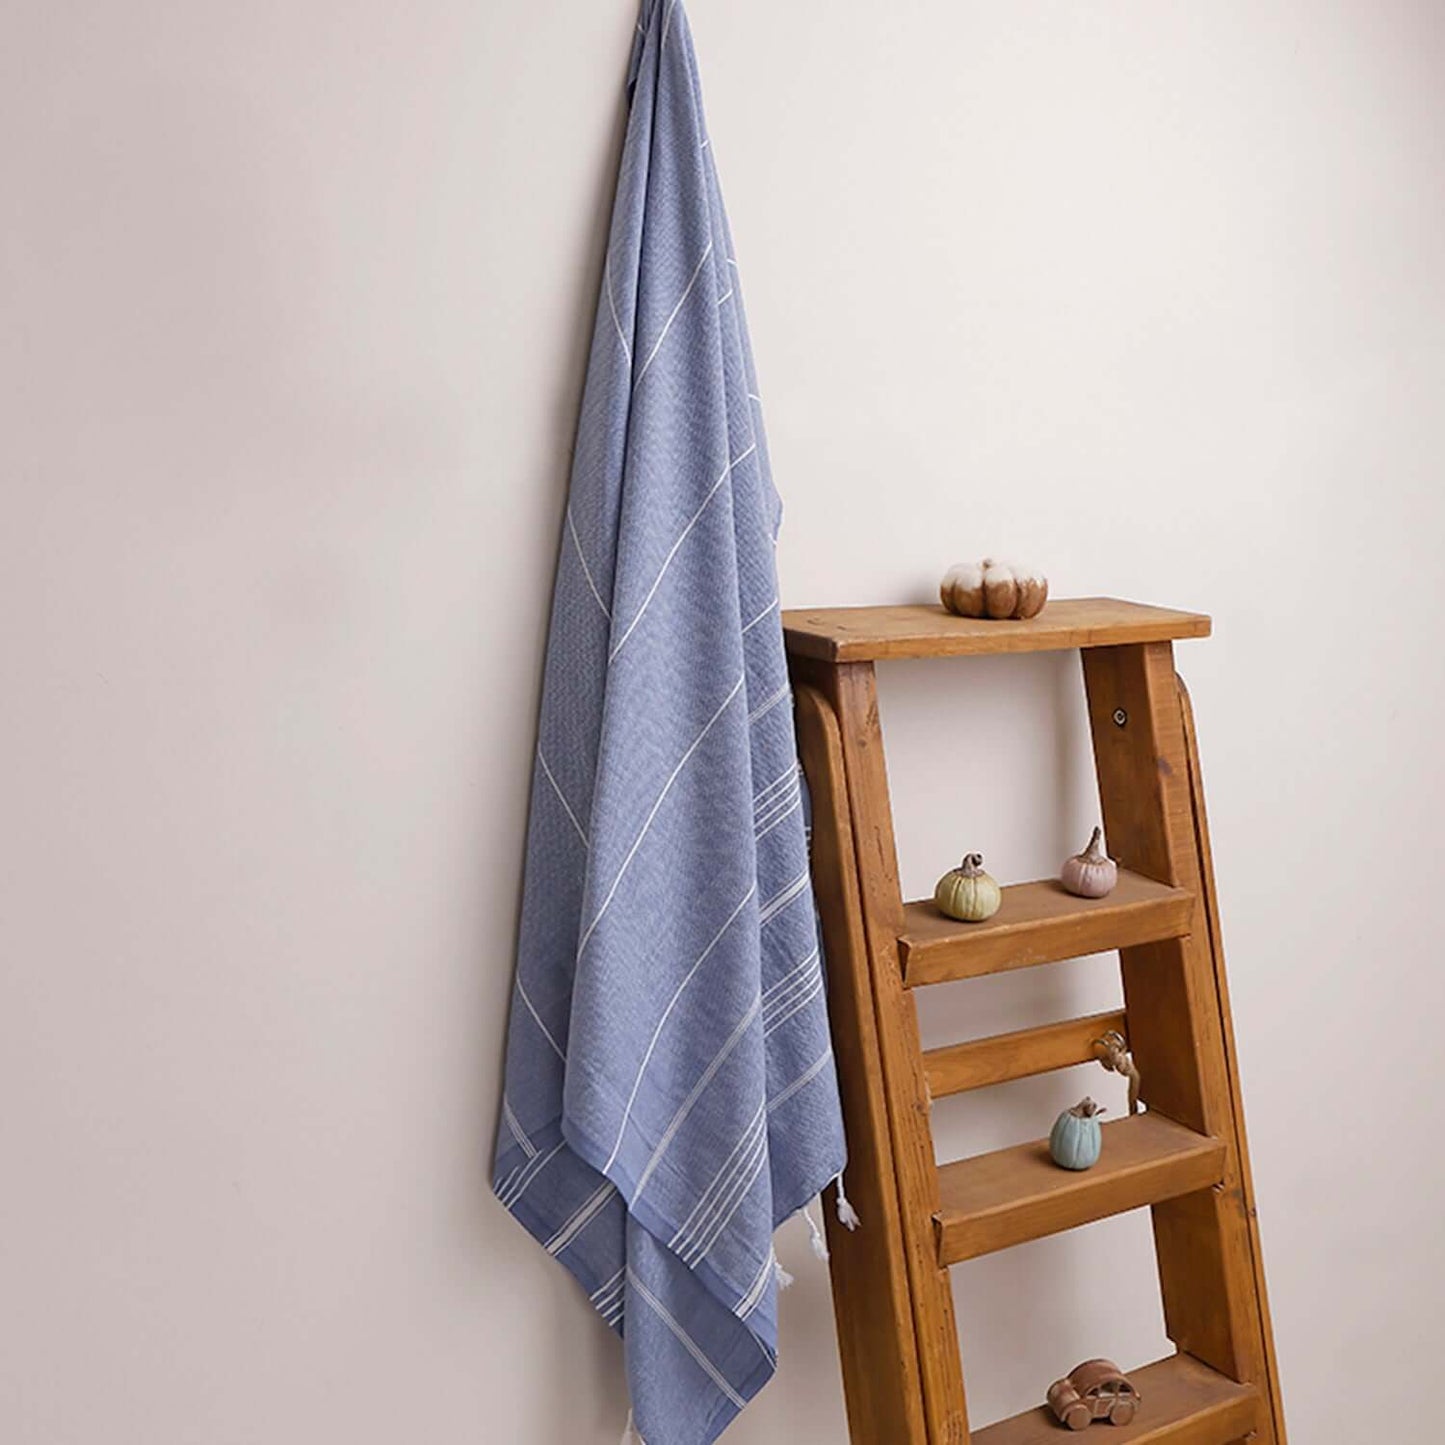 Loom Legacy dark blue striped beach towel with tassels, draped over a wooden ladder beside small decorative items on the shelves.